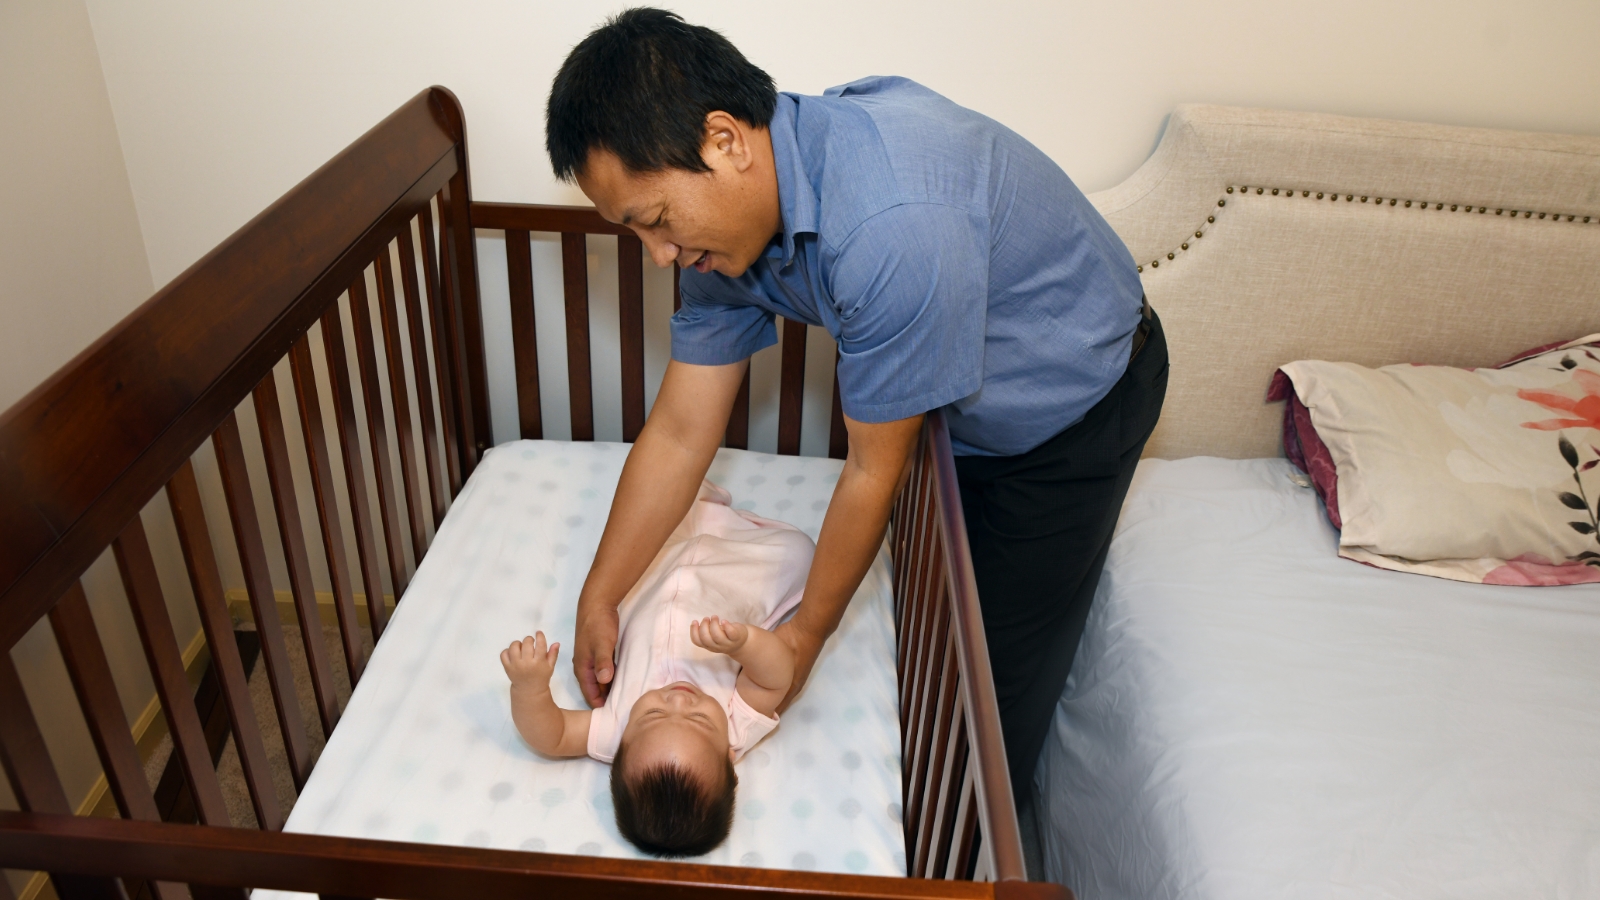 A father reaches toward a baby in a crib next to the bed.